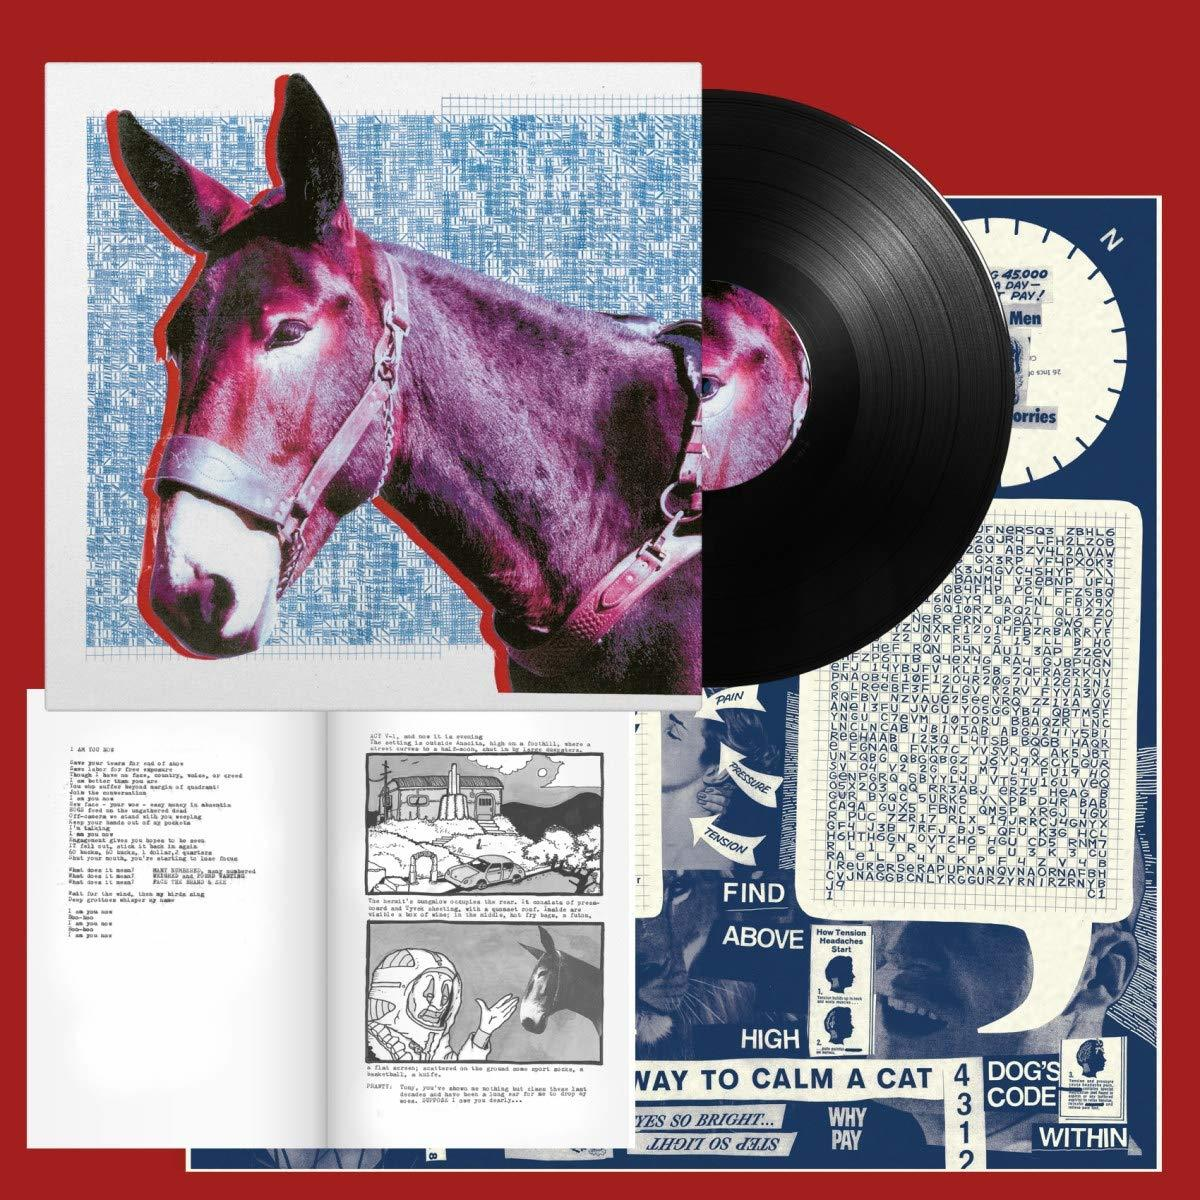 Protomartyr - ULTIMATE TODAY Download) - (+MP3+POSTER) (LP + SUCCESS